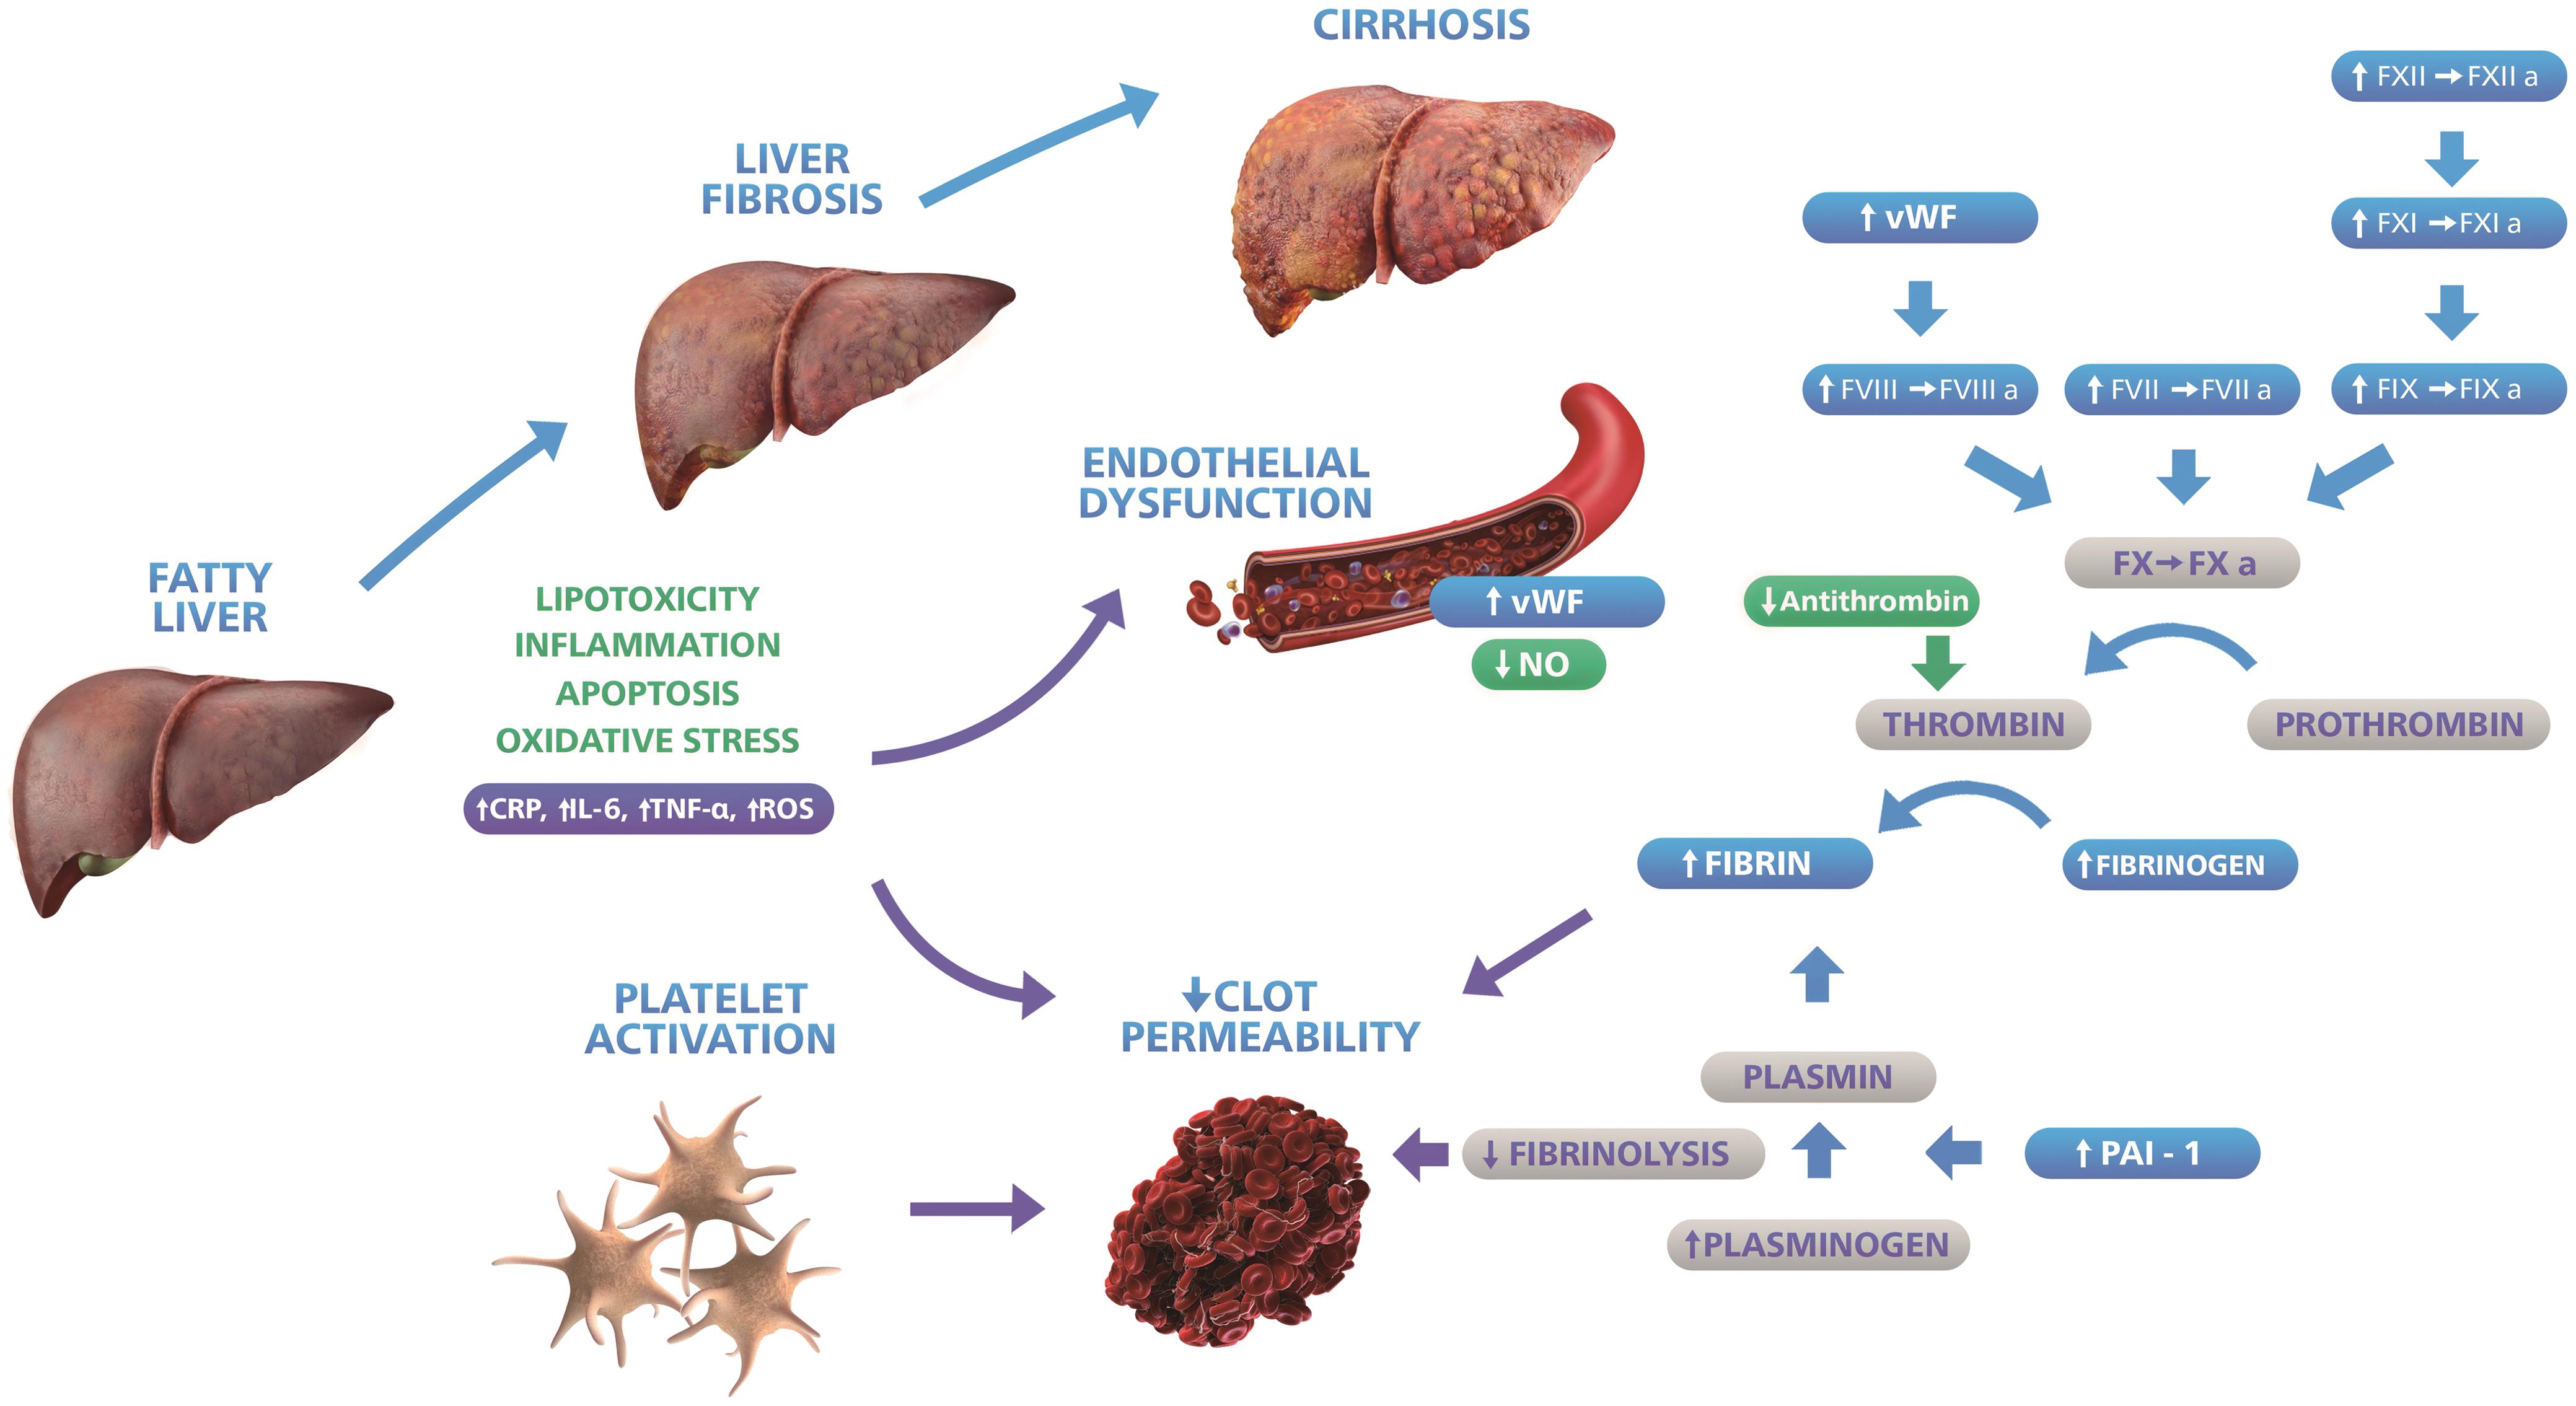 Possible alterations in the coagulation cascade, fibrinolysis, platelet and ED associated with non-alcoholic fatty liver disease, with mechanisms responsible for potential prothrombotic and procoagulant imbalance in patients with NAFLD.